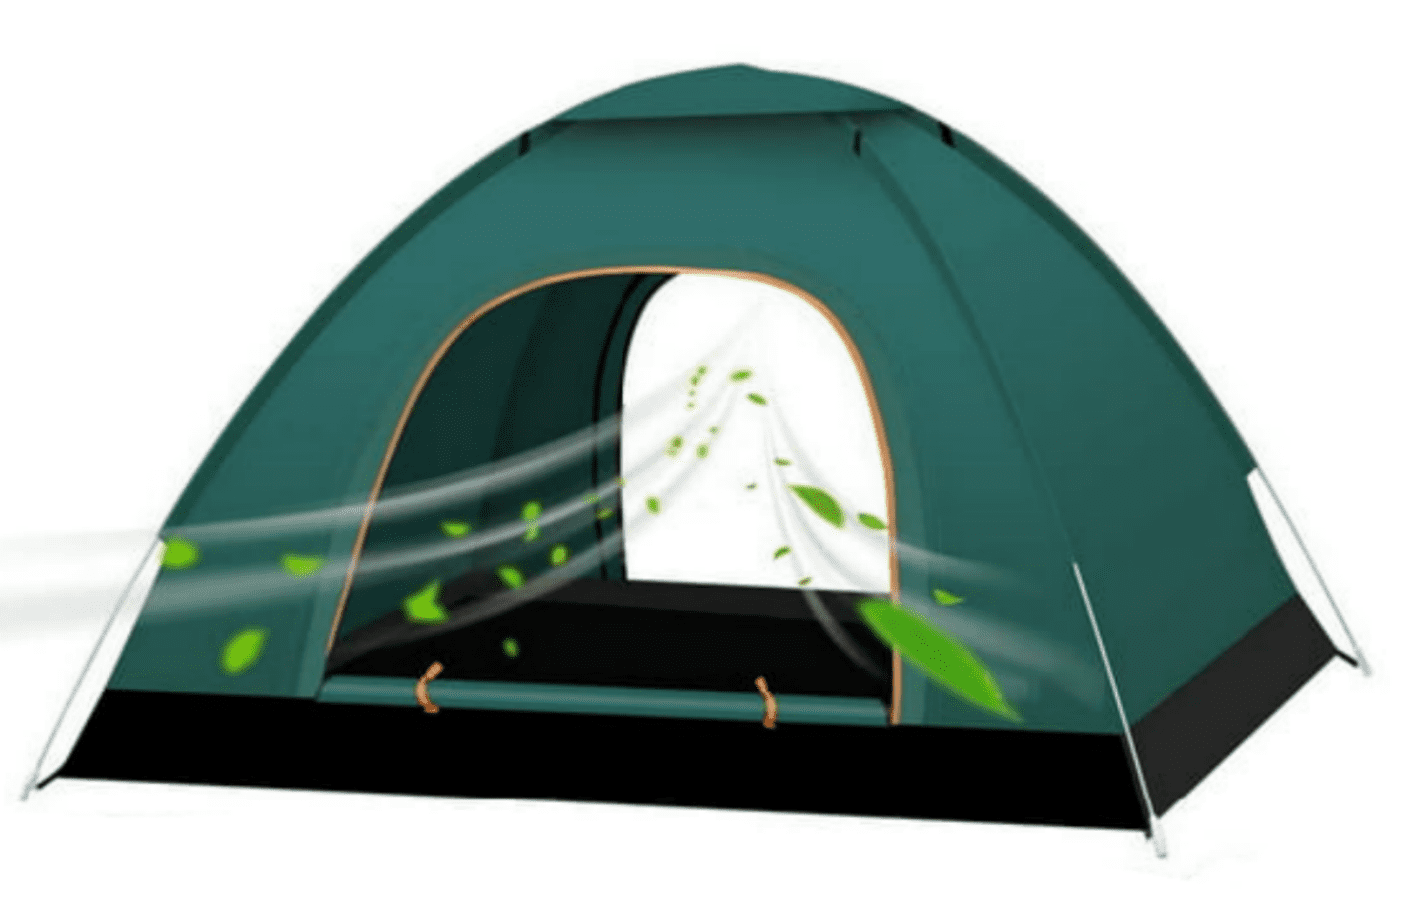 2 -3 Person Camping Dome Tent, Waterproof,Spacious, Lightweight Portable Backpacking Tent for Outdoor Camping/Hiking